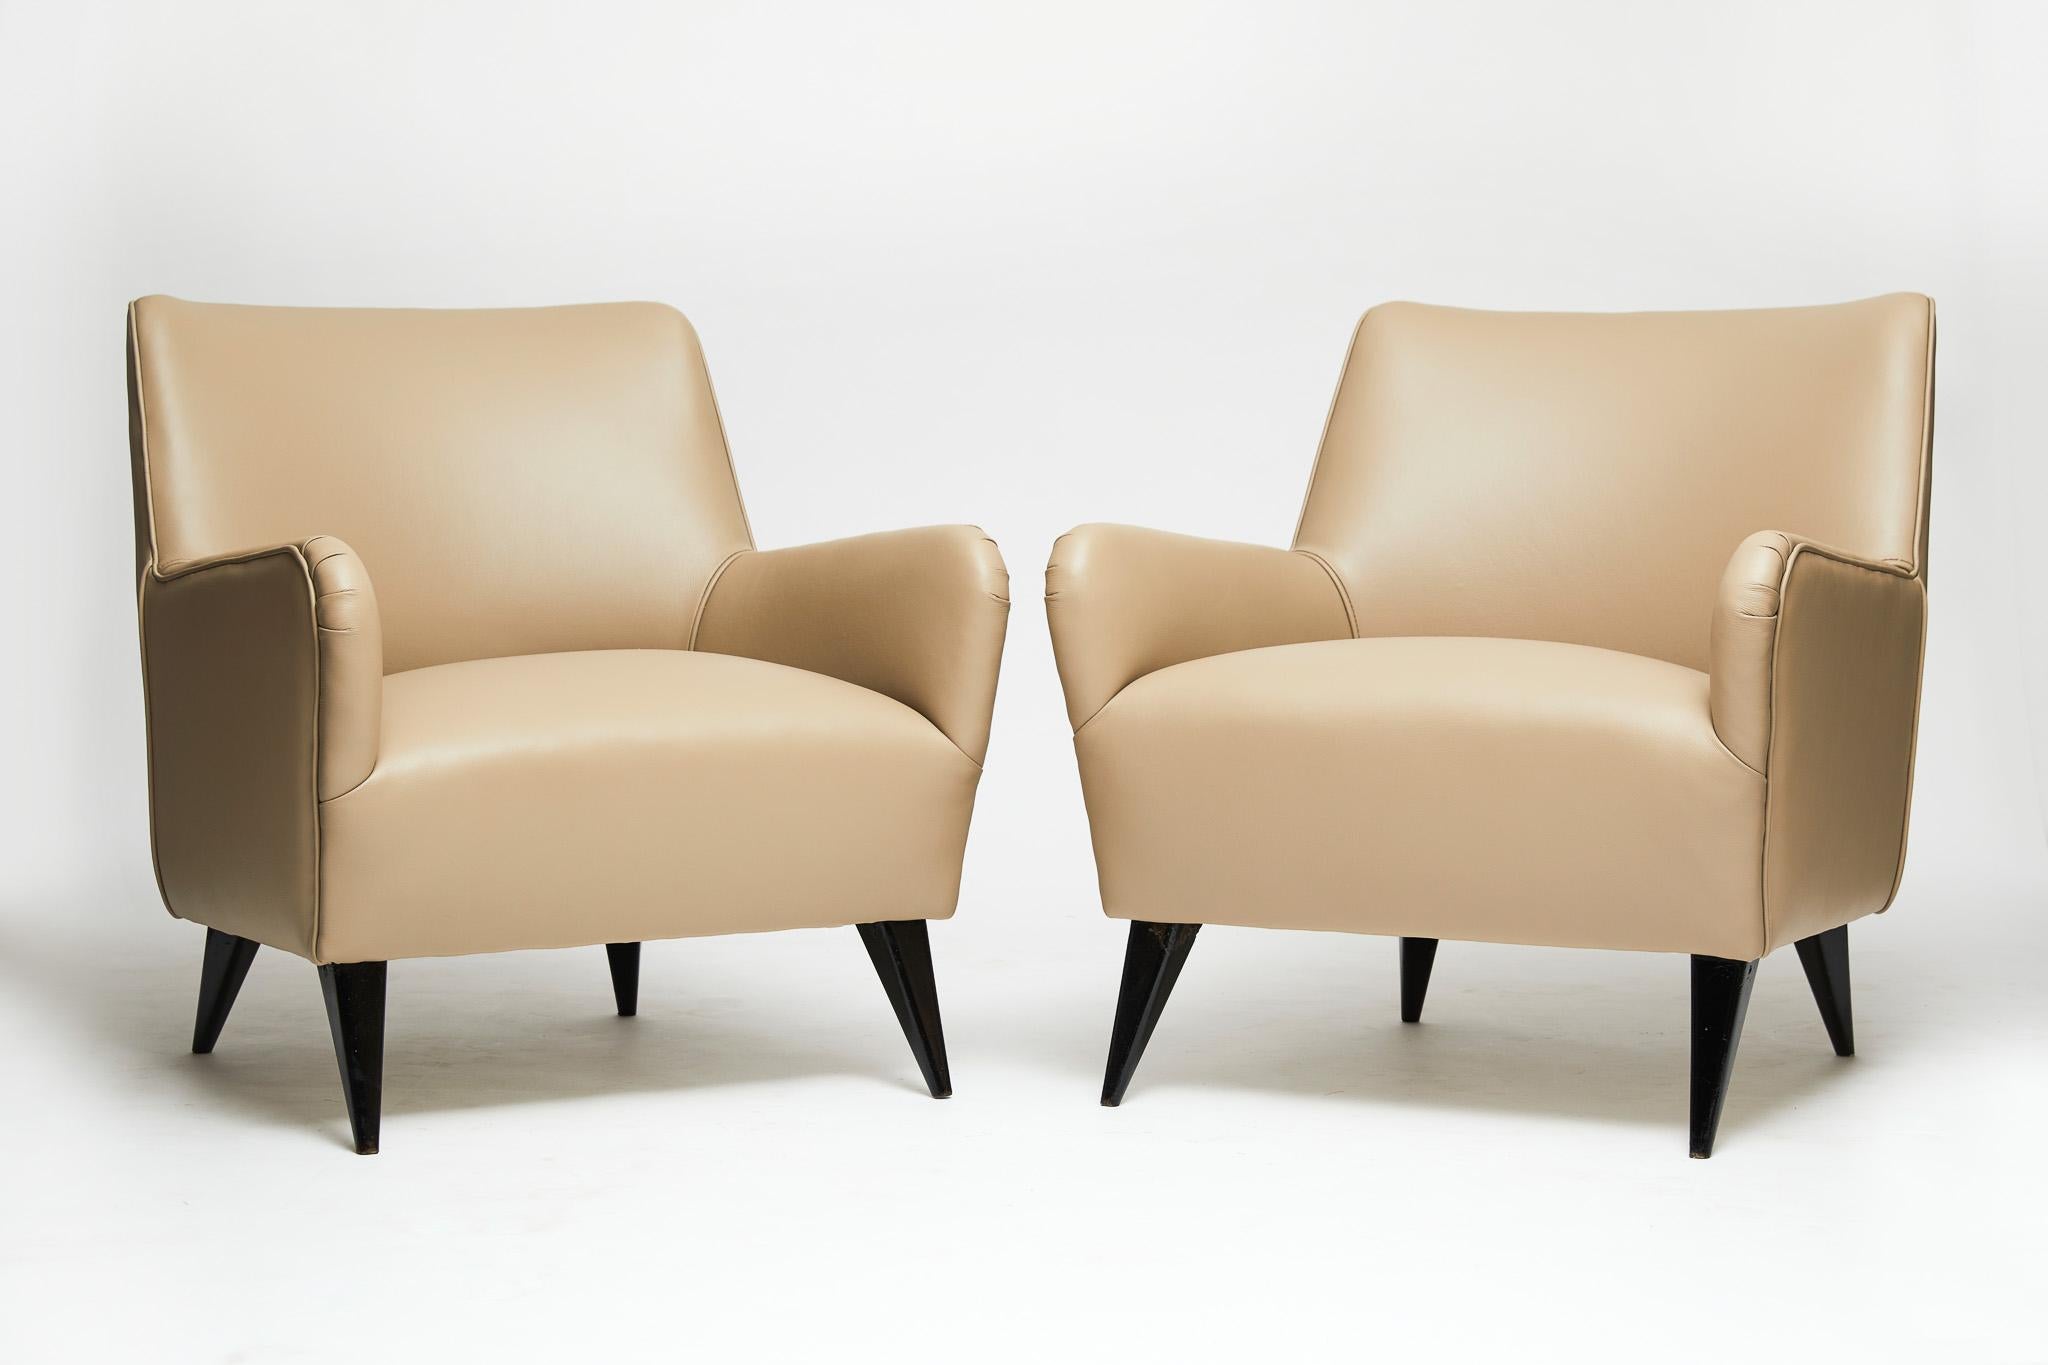 Mid-Century Modern Armchairs in Leather & Wood by Joaquim Tenreiro, 1955, Brazil For Sale 3